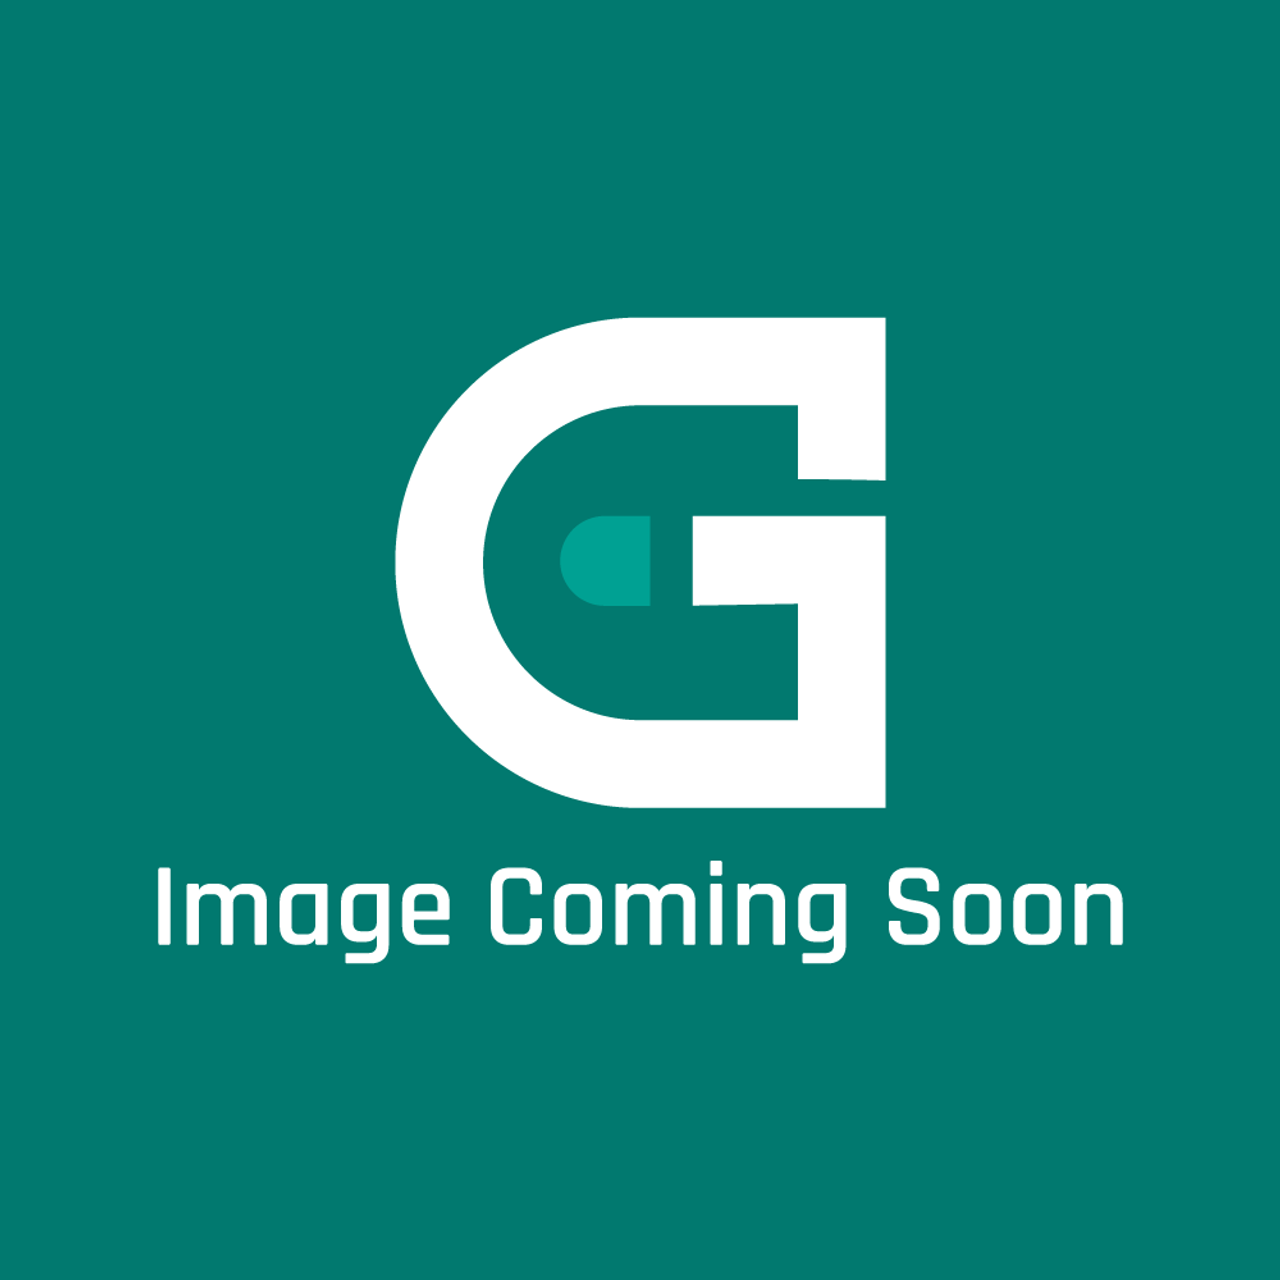 Frigidaire - Electrolux 154713216 Panel - Image Coming Soon!